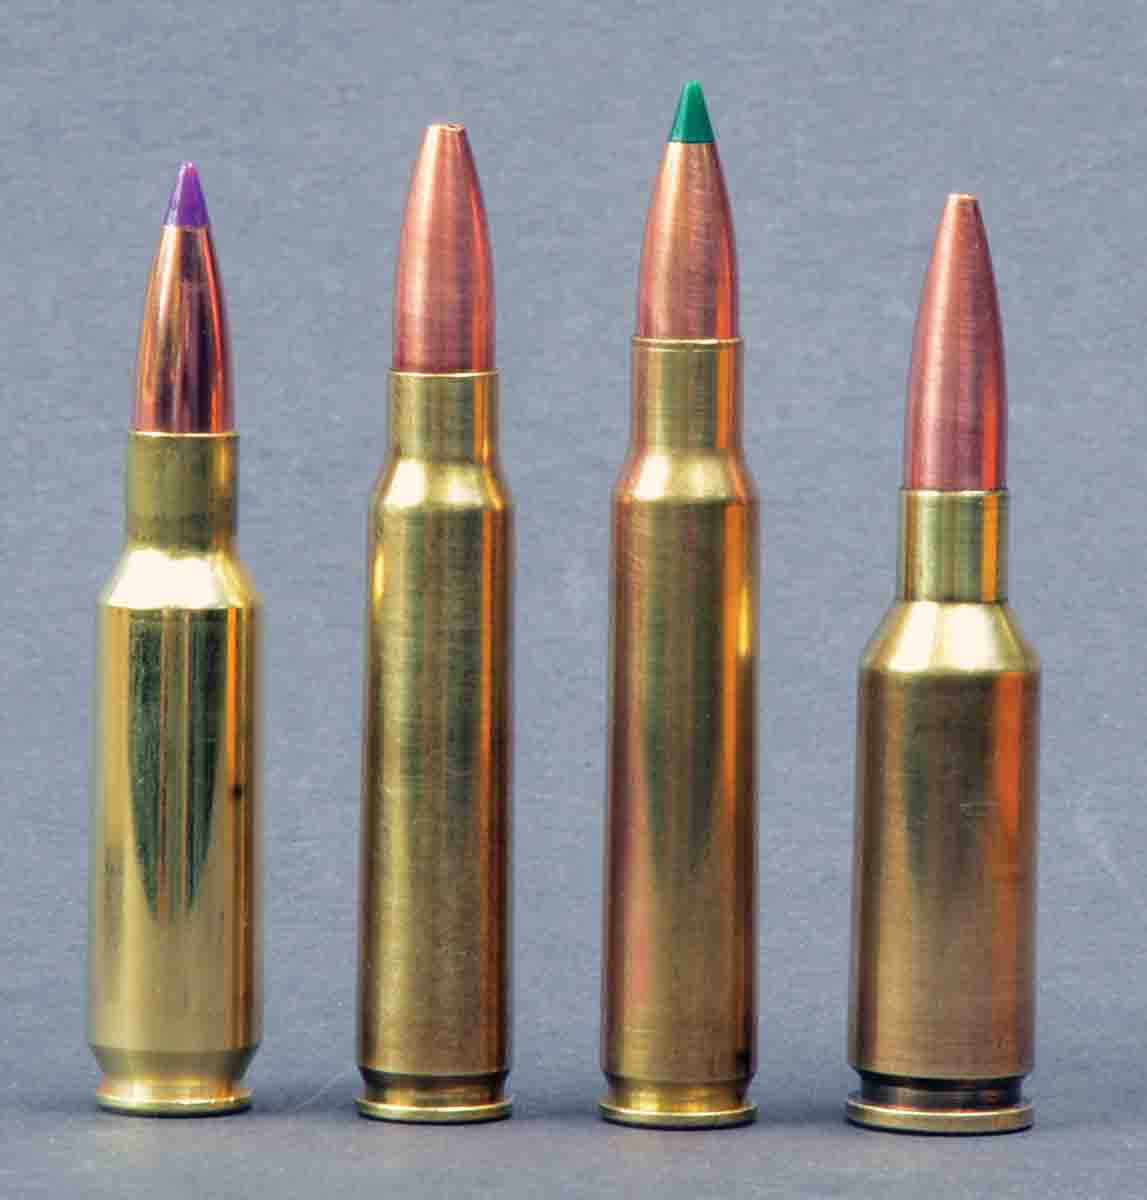 Accuracy cartridges of the same caliber and with similar powder capacities include (left to right) the .24 Nosler, 6x45mm, 6x47mm and the 6mm PPC.